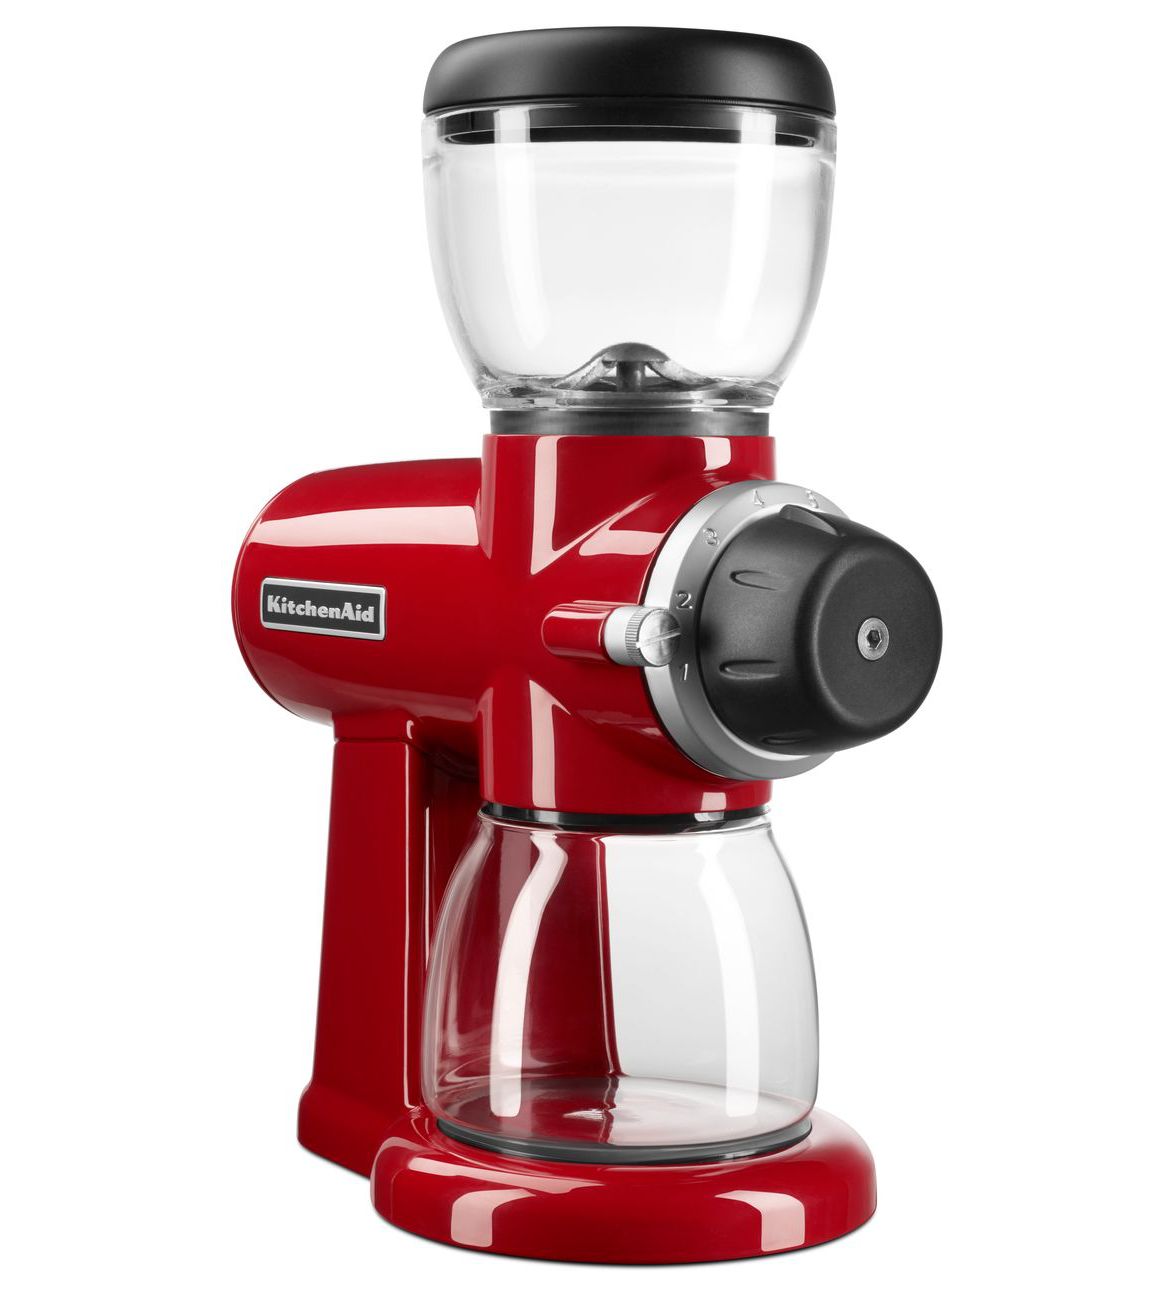 KitchenAid Burr Grinder Information and Replacement Parts - Appliance Zone  .Net